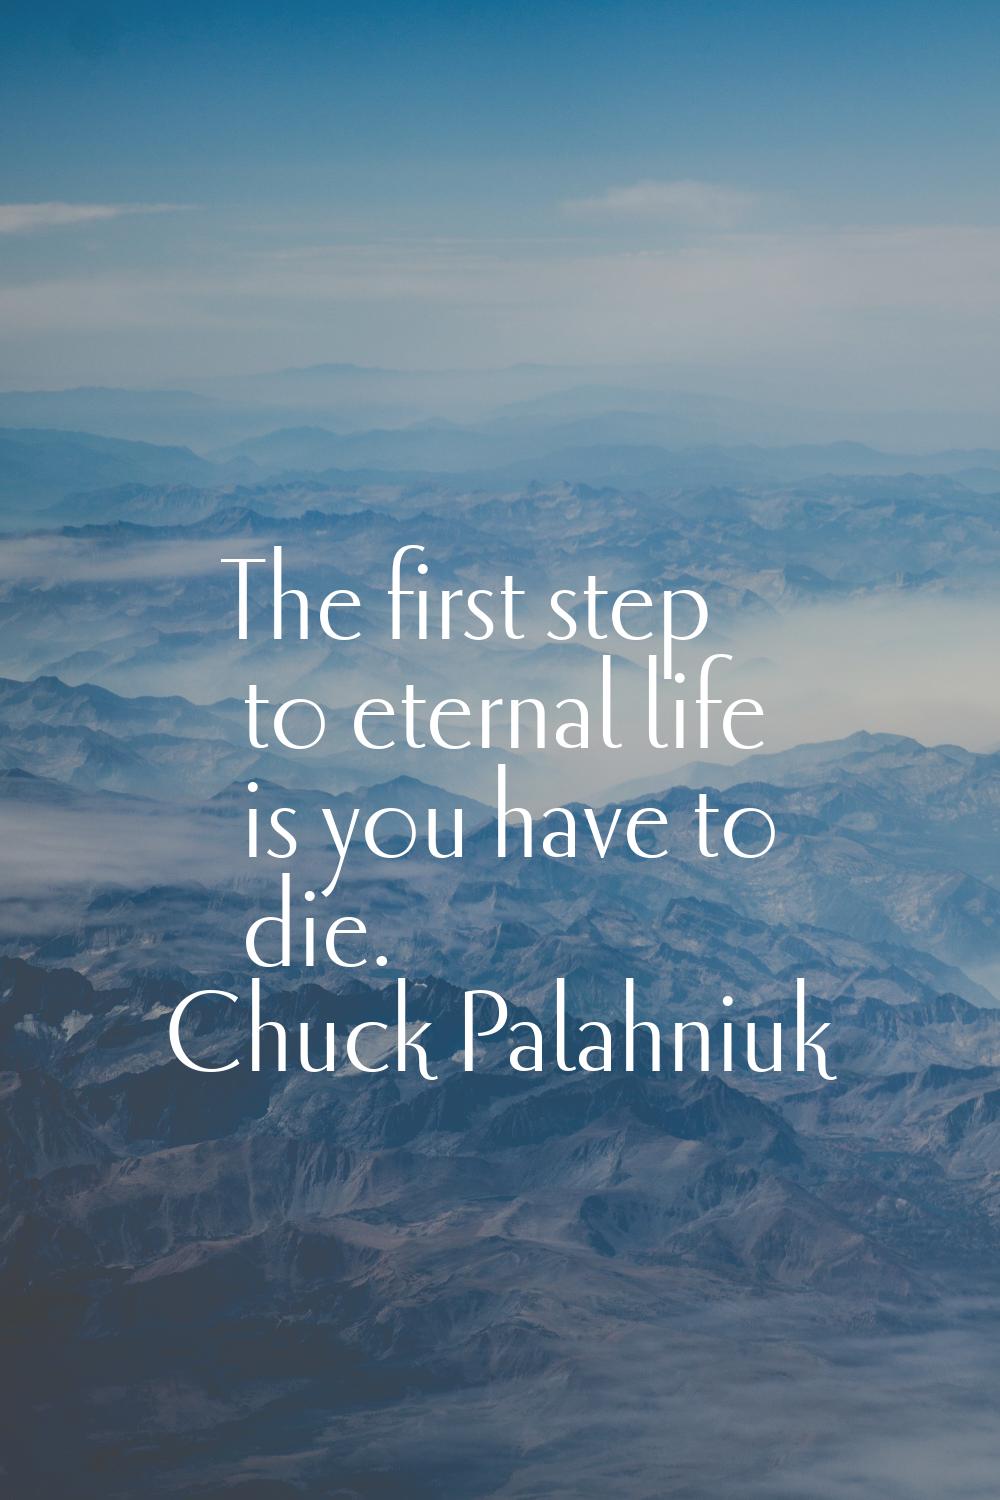 The first step to eternal life is you have to die.